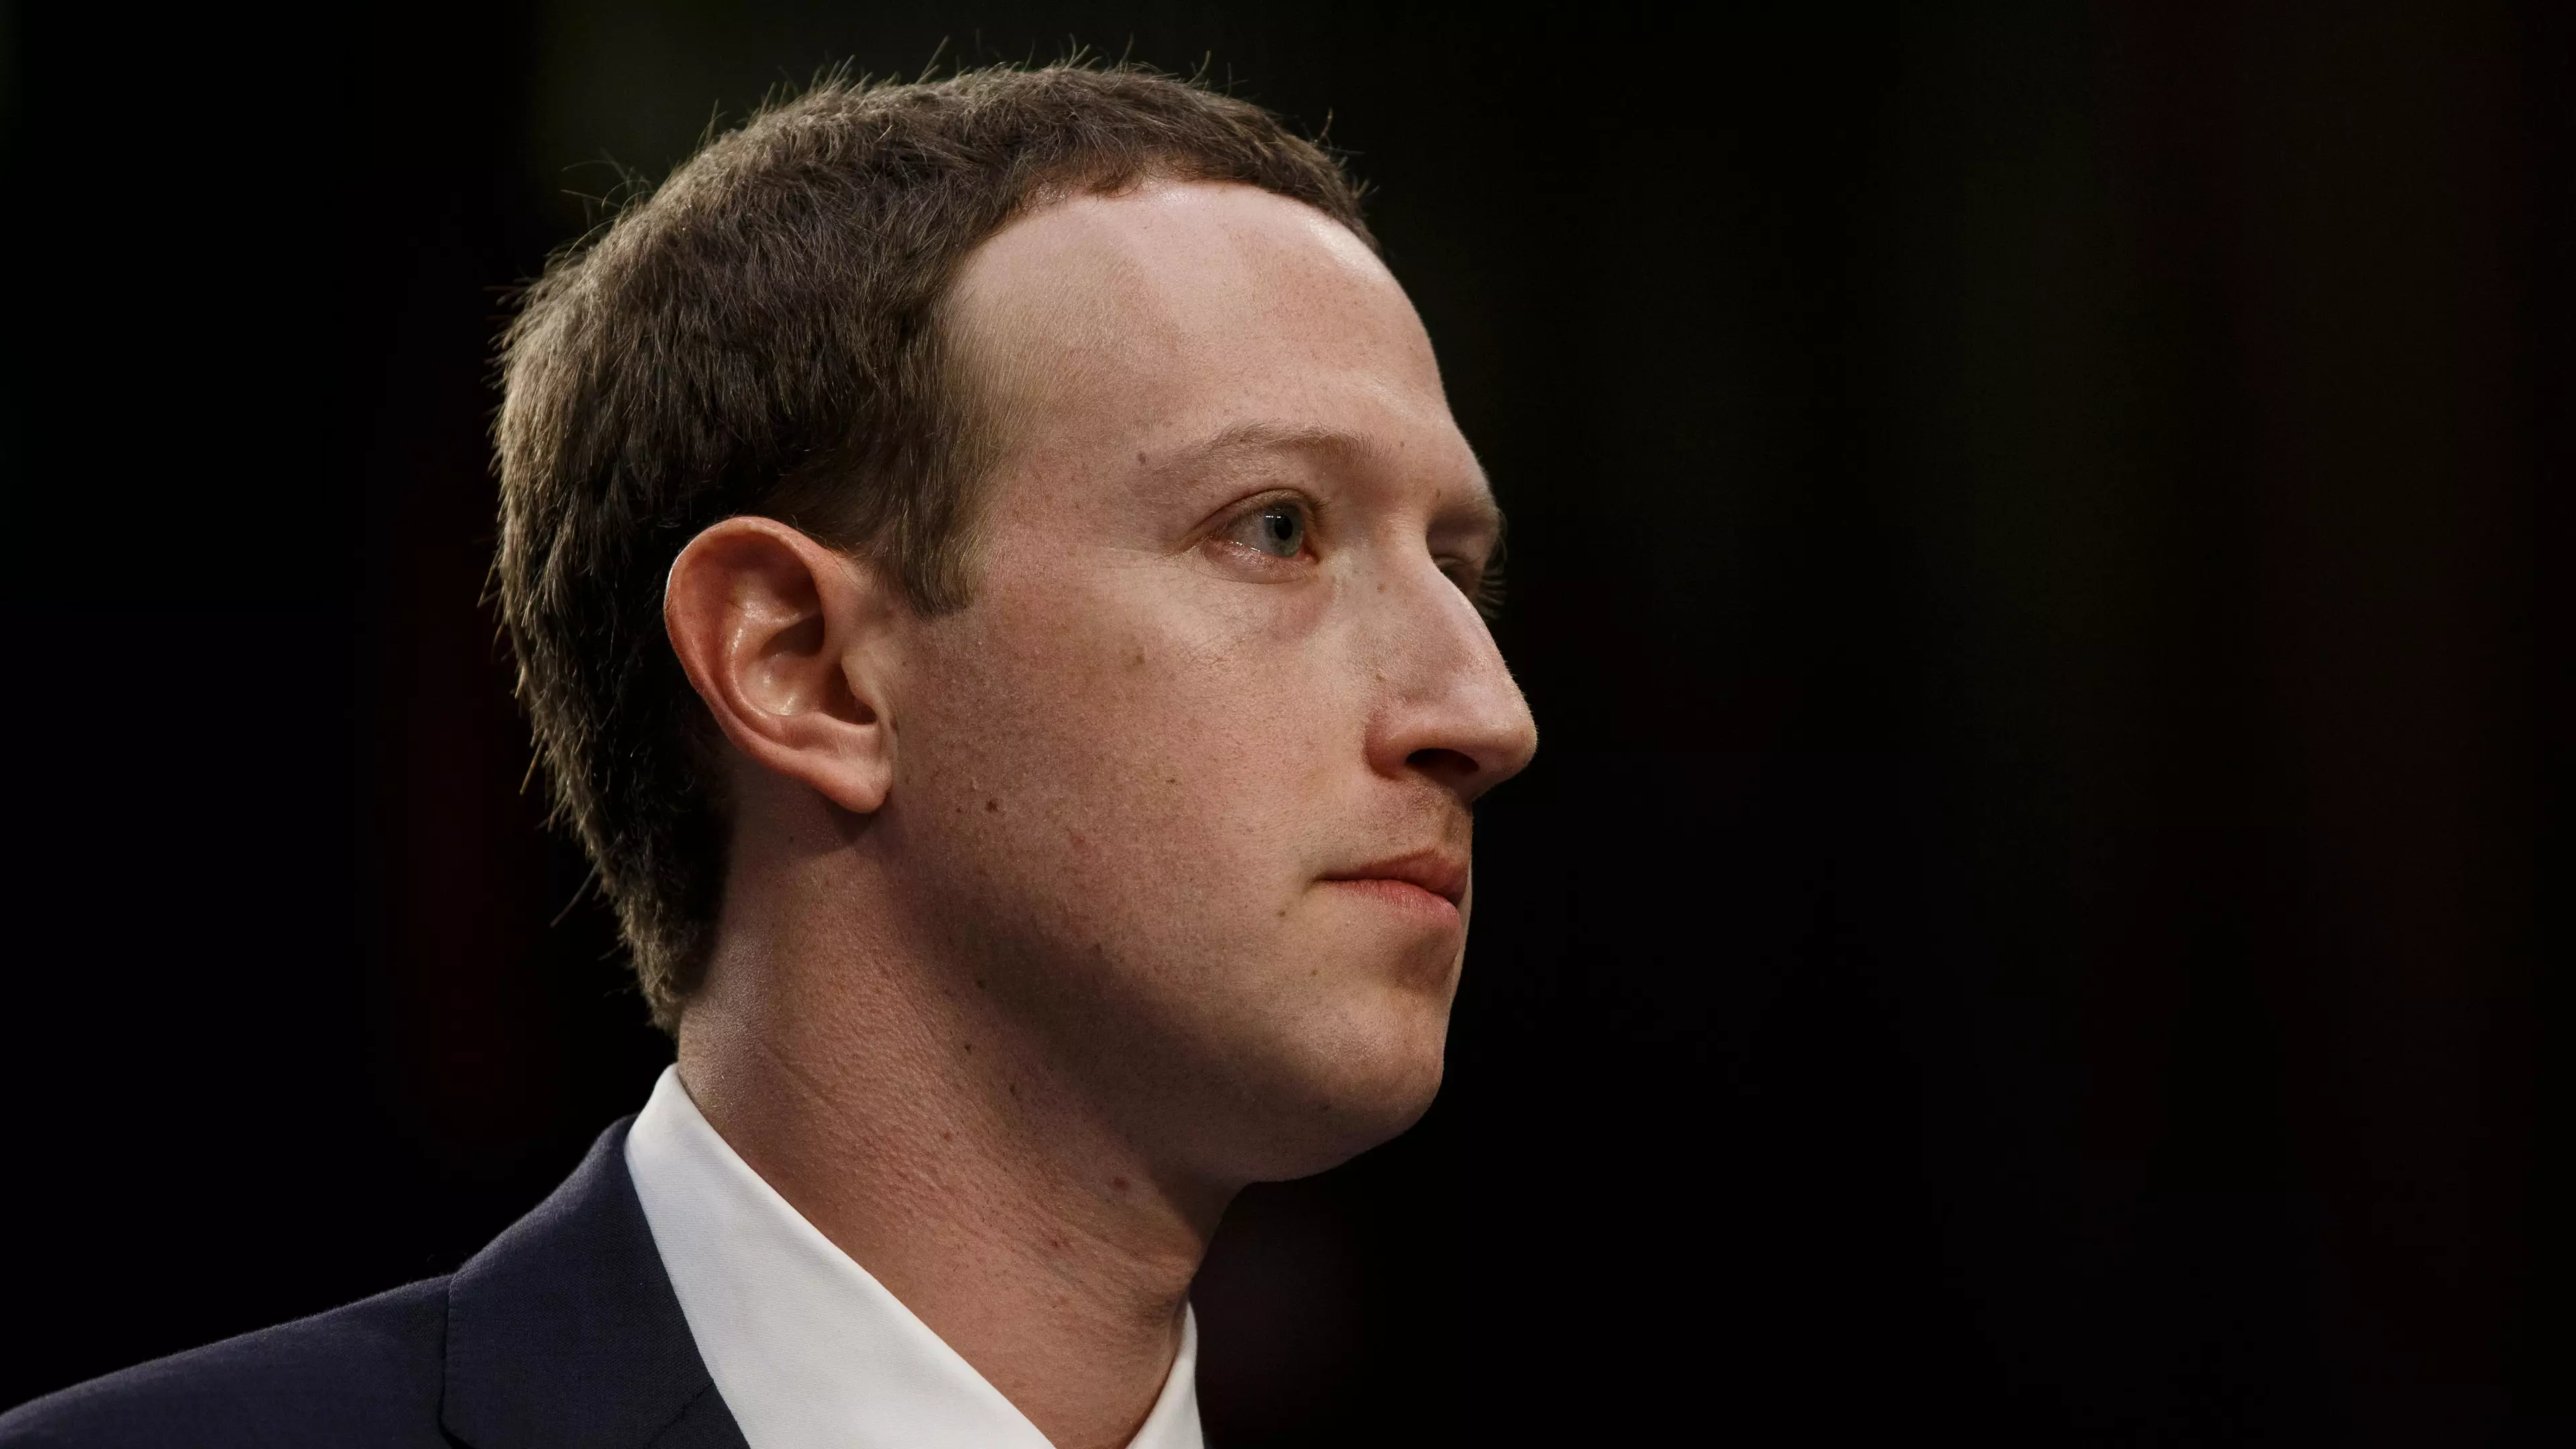 Mark Zuckerberg's Net Worth Plummeted During Facebook And Instagram Outage